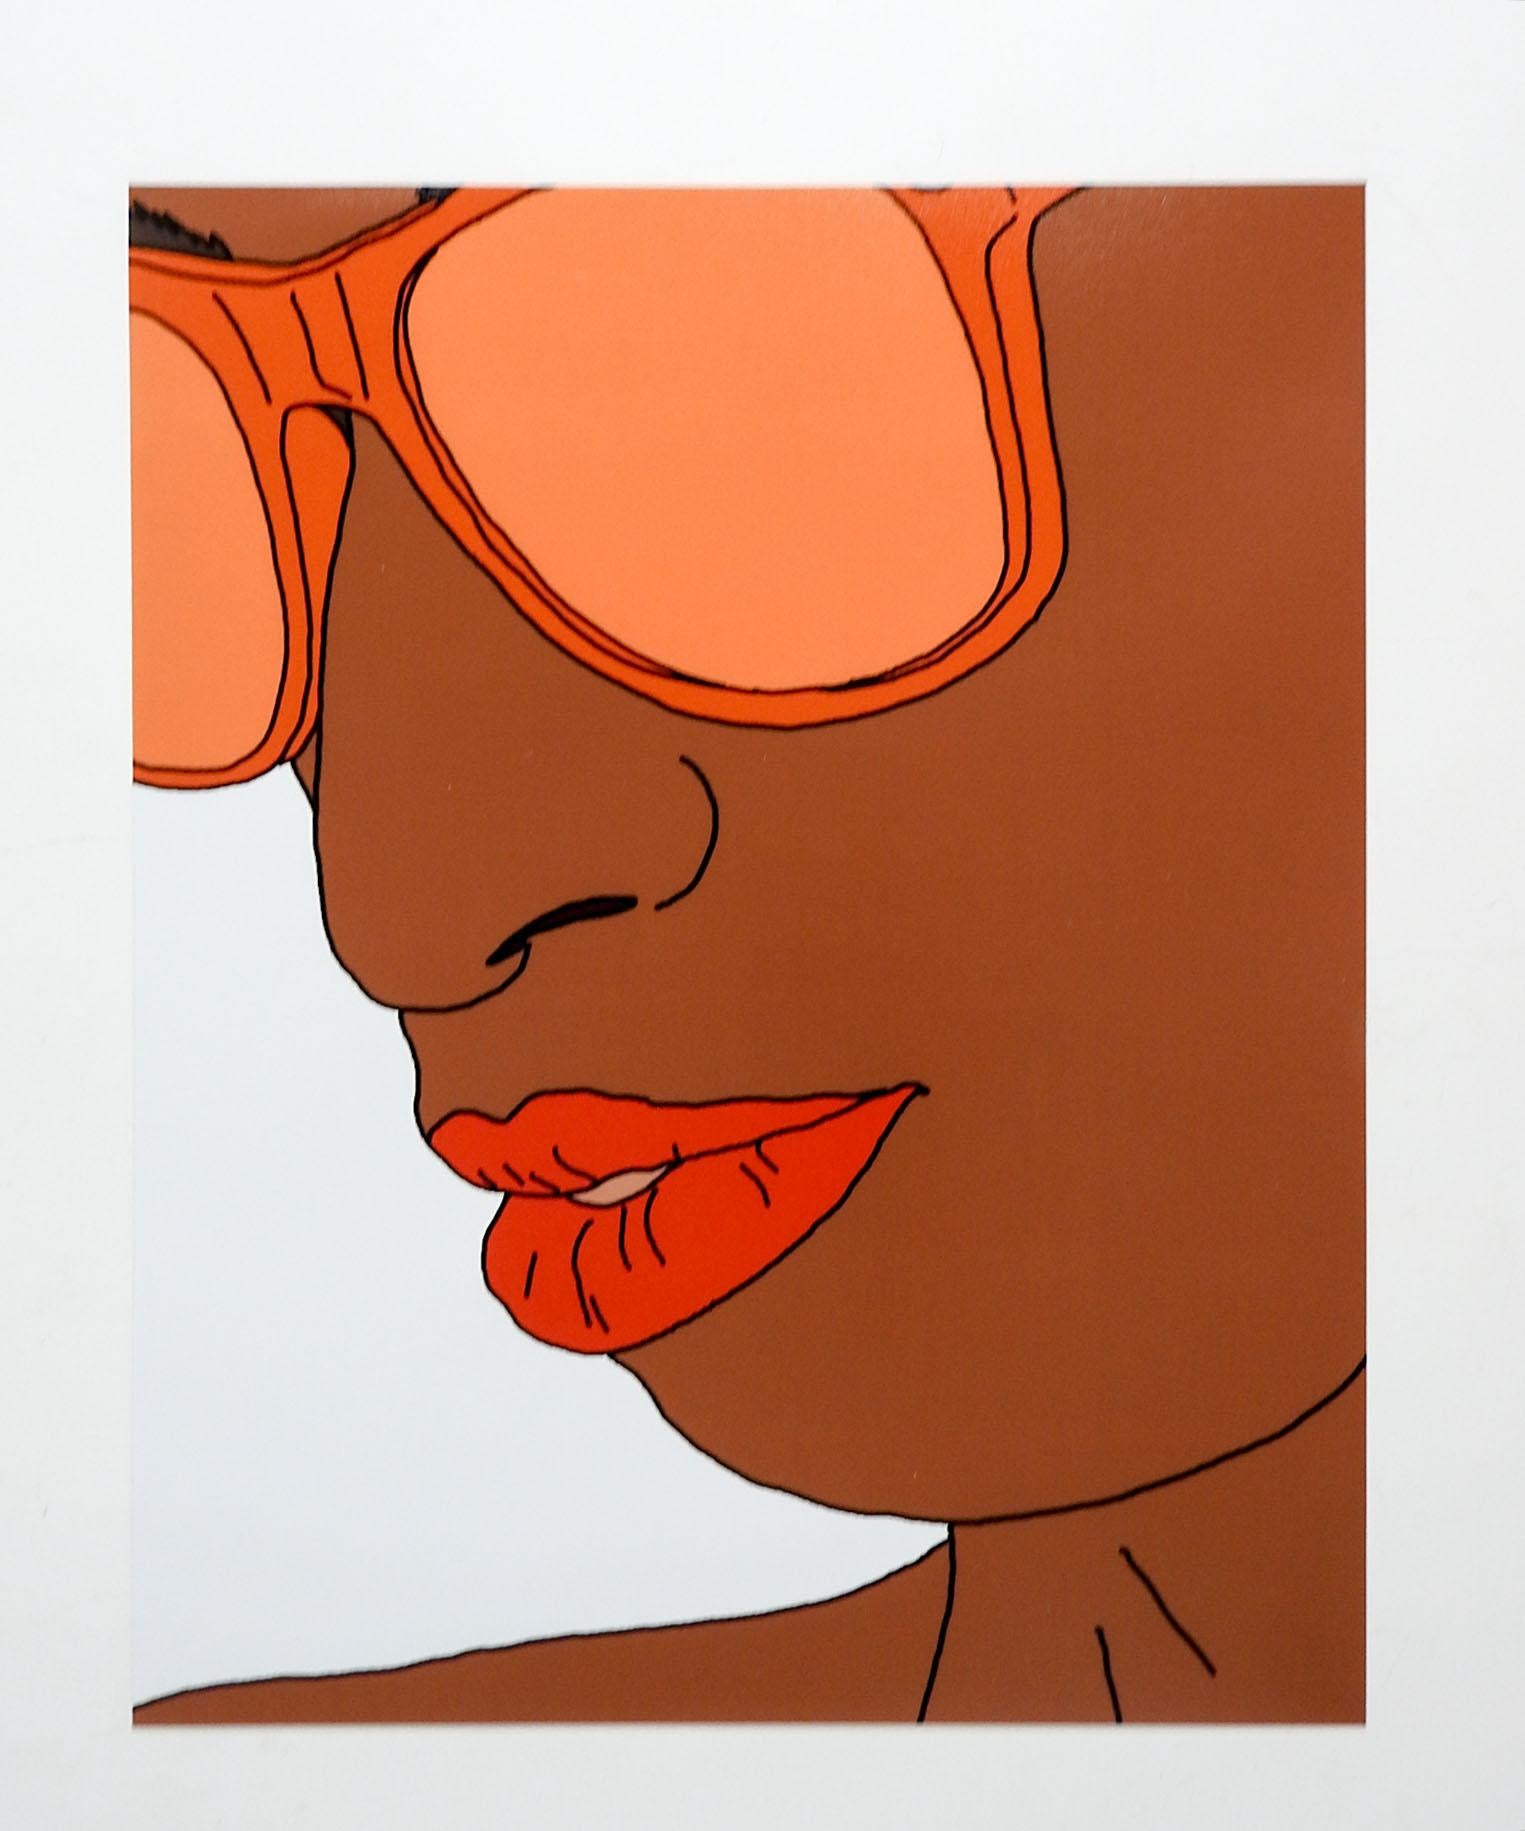 Contemporary 2021 Pop Art giclee print on satin photographic paper paper by David Grinnell (21st century) Texas. Printed artist and titled Orange Wayfarers on verso. Graphic stylish portrait of African American woman wearing sunglasses. Unframed,